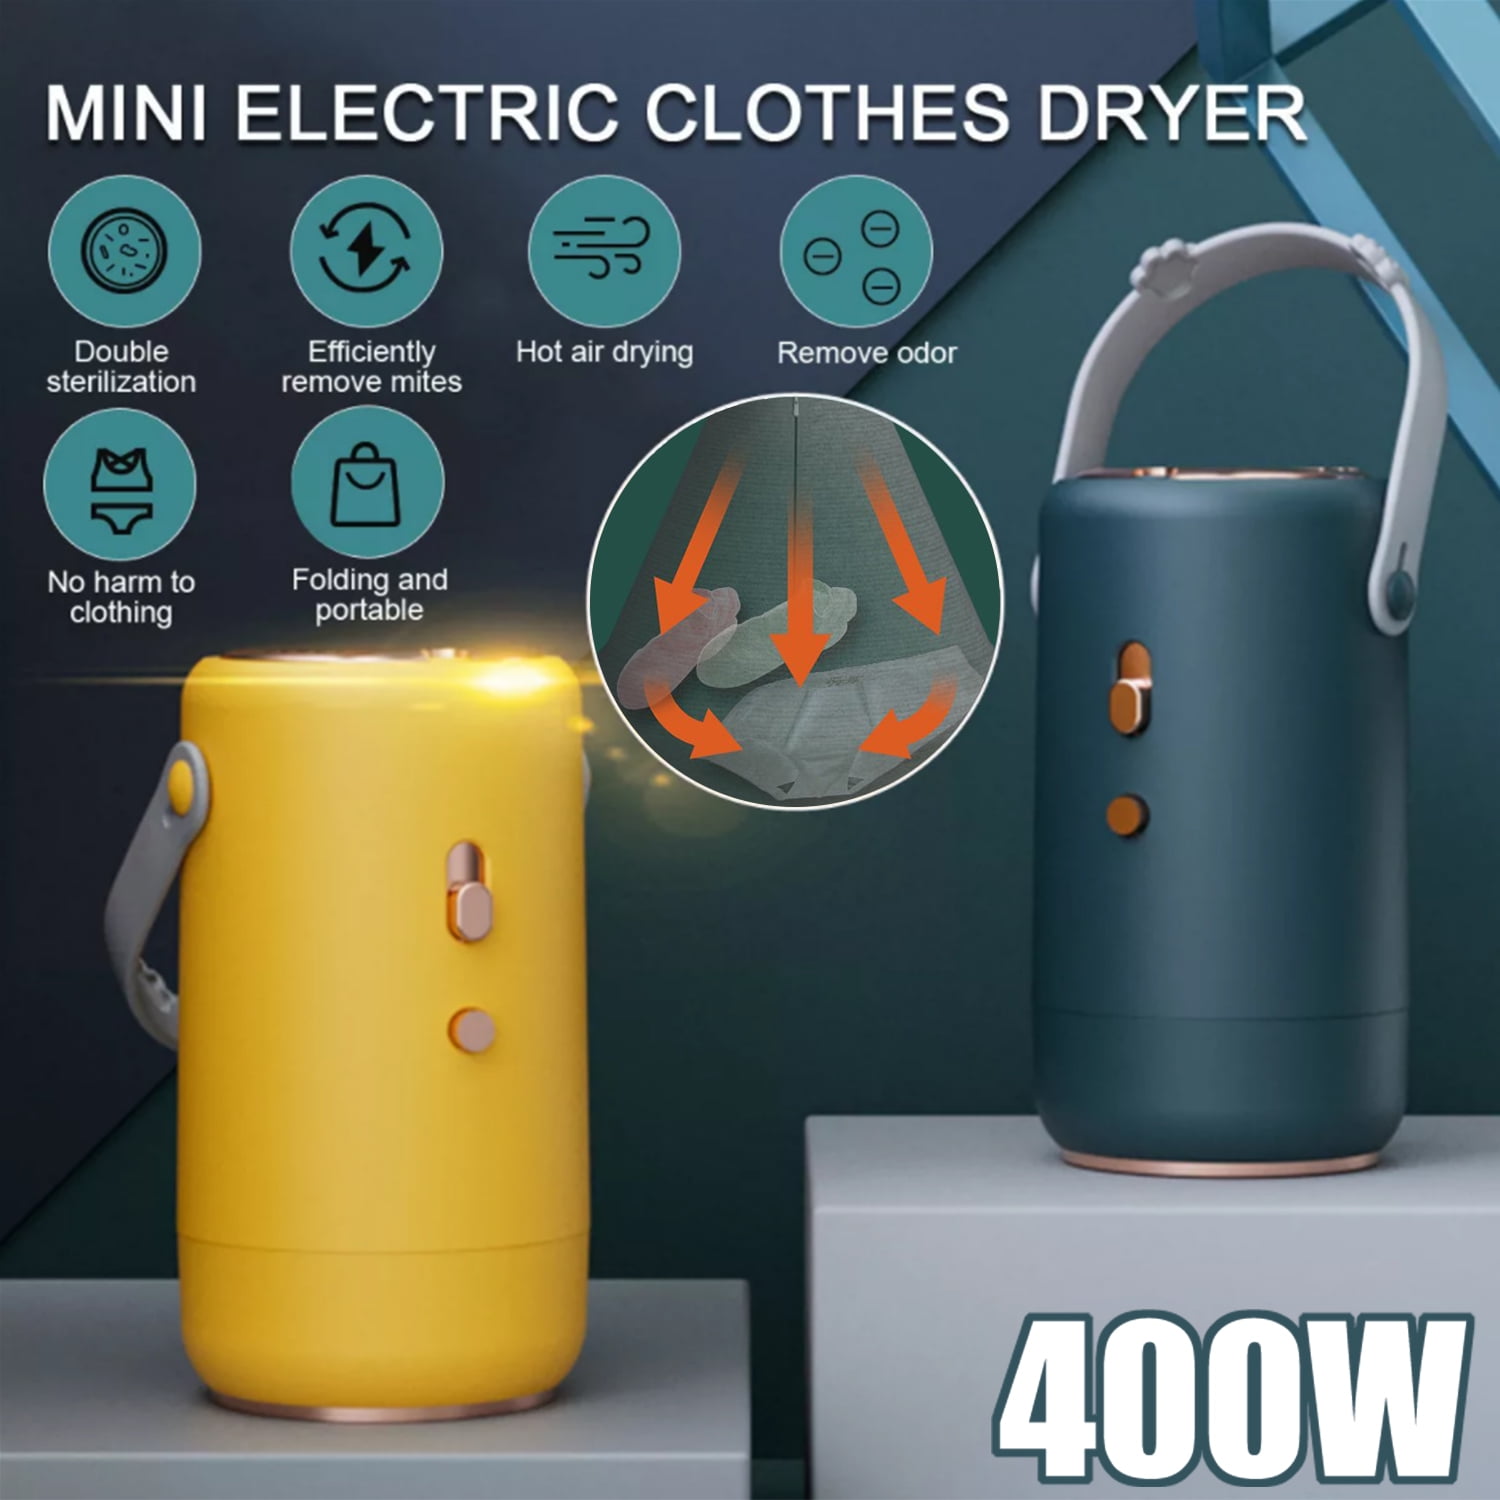 Wholesale mini clothes dryer Products to Dry Clothes Easily –